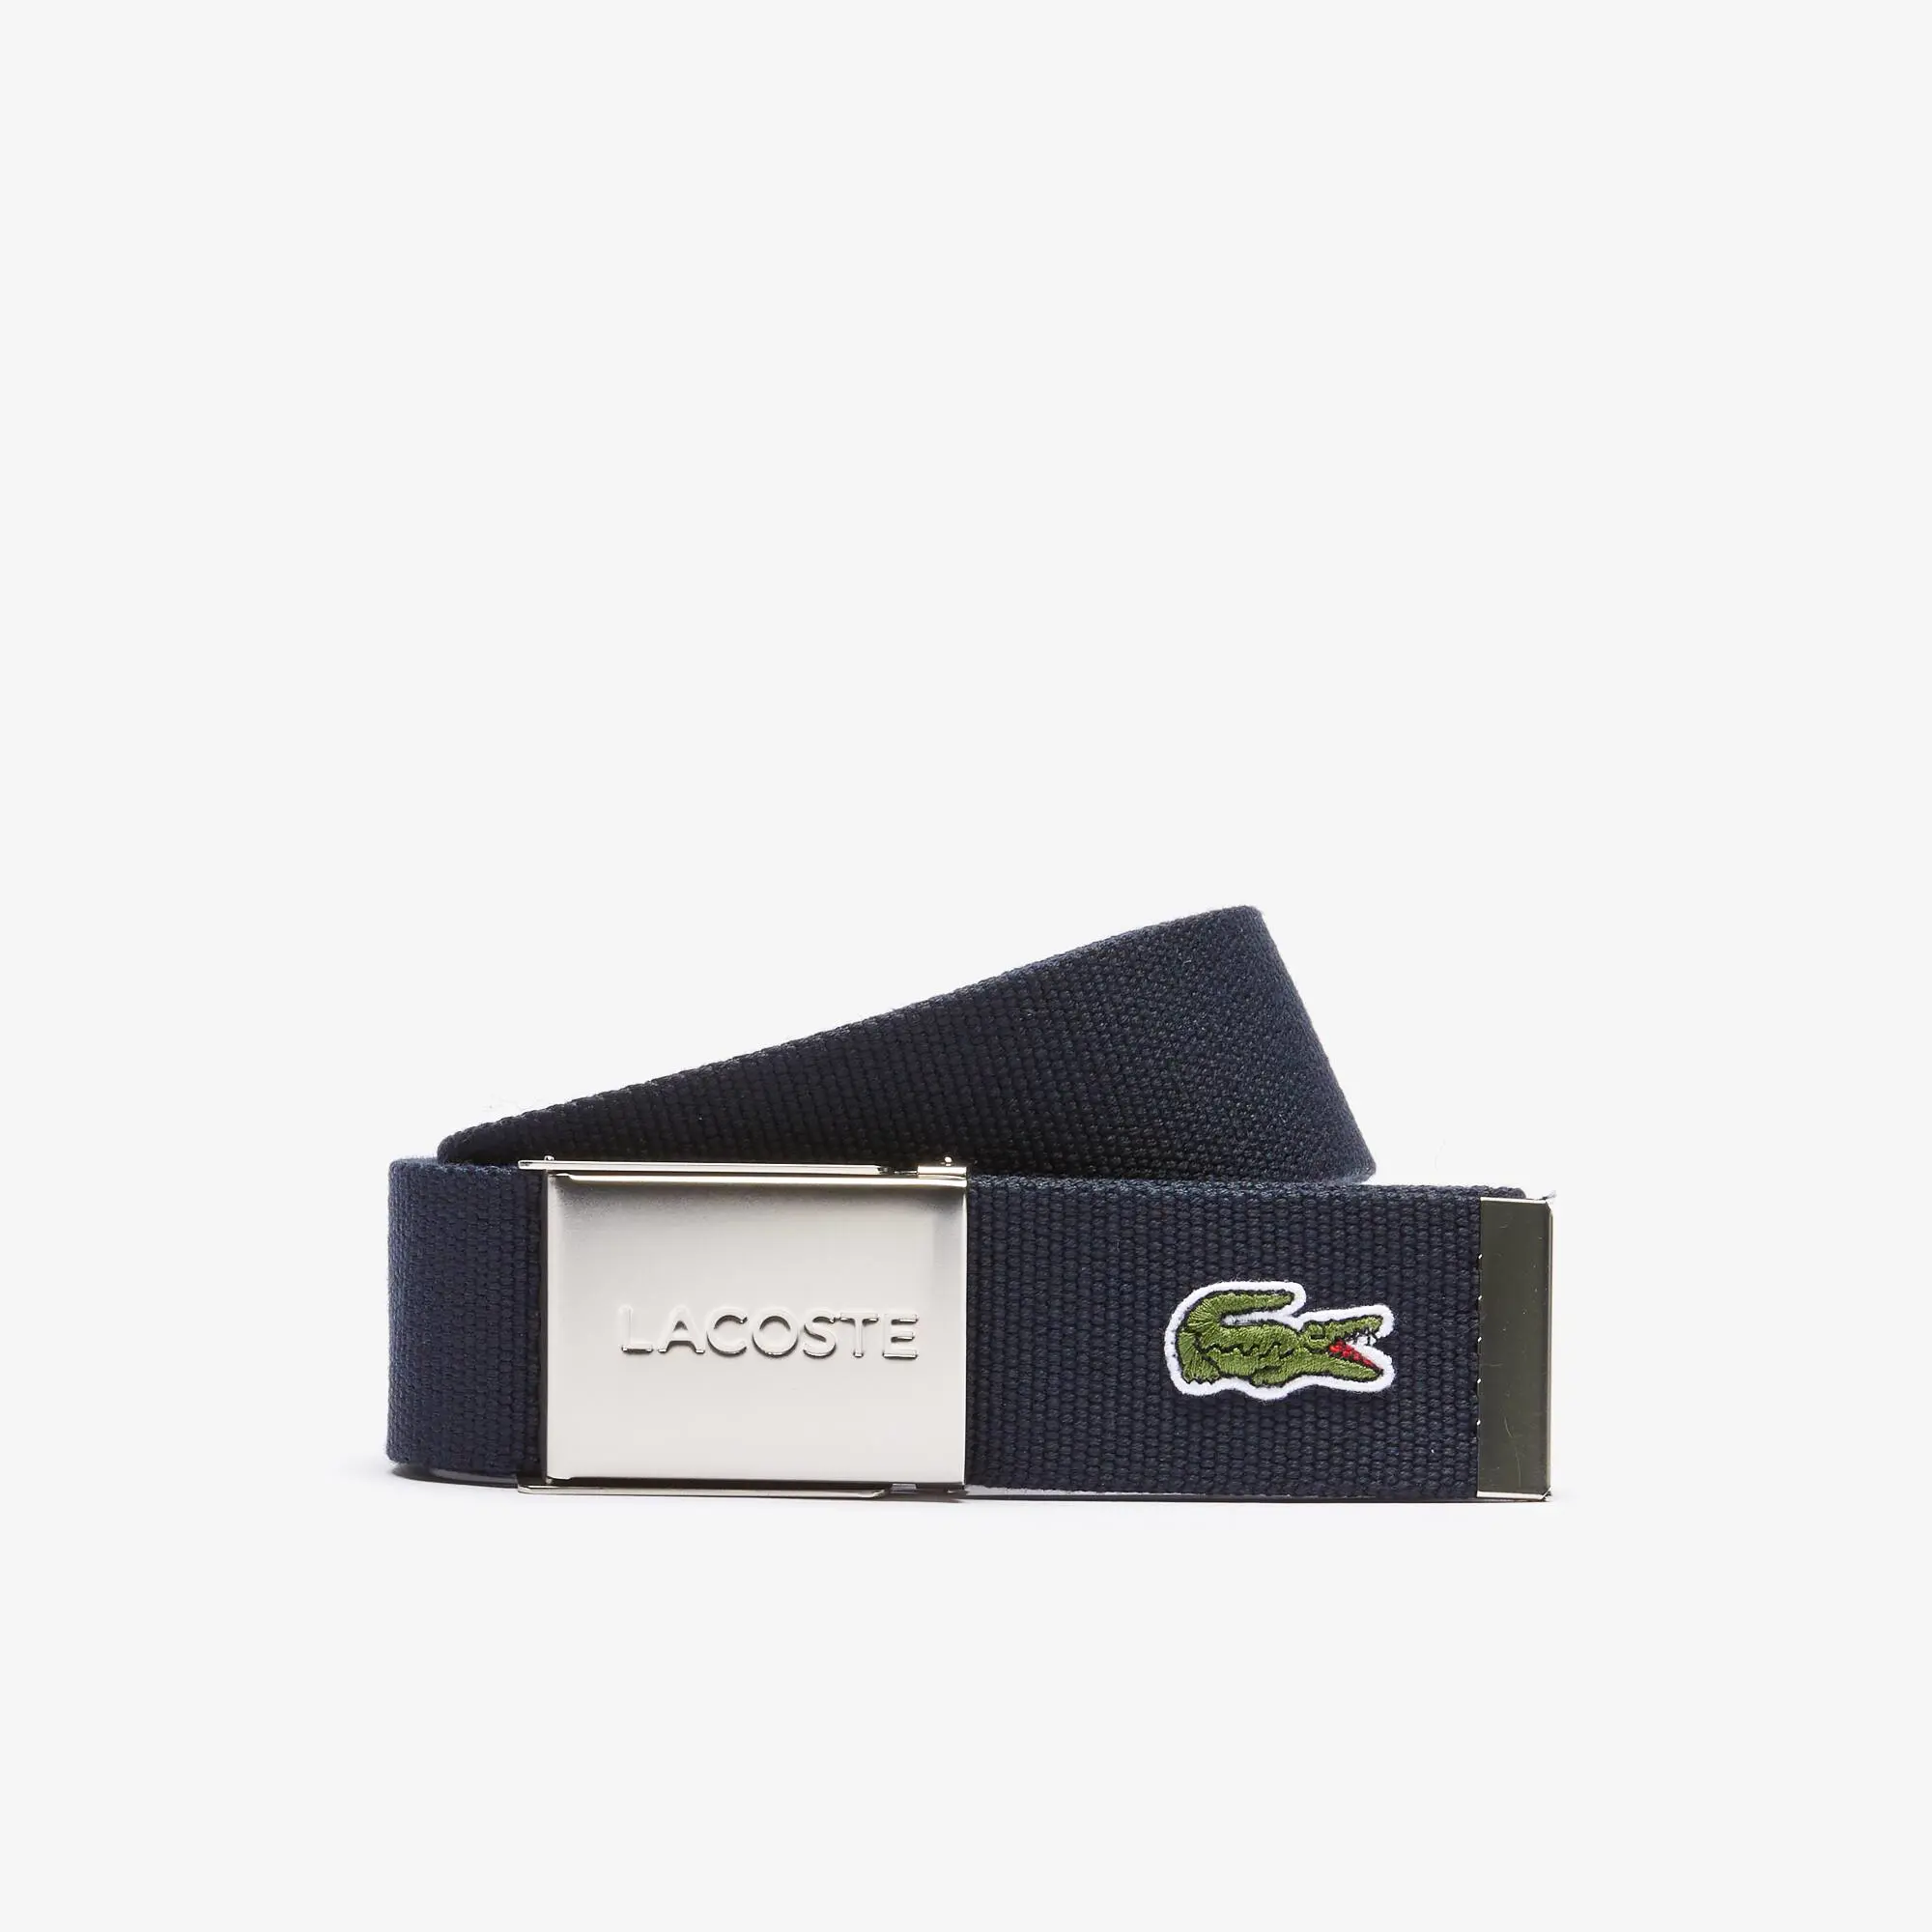 Lacoste Men's Made in France Lacoste Engraved Buckle Woven Fabric Belt. 1